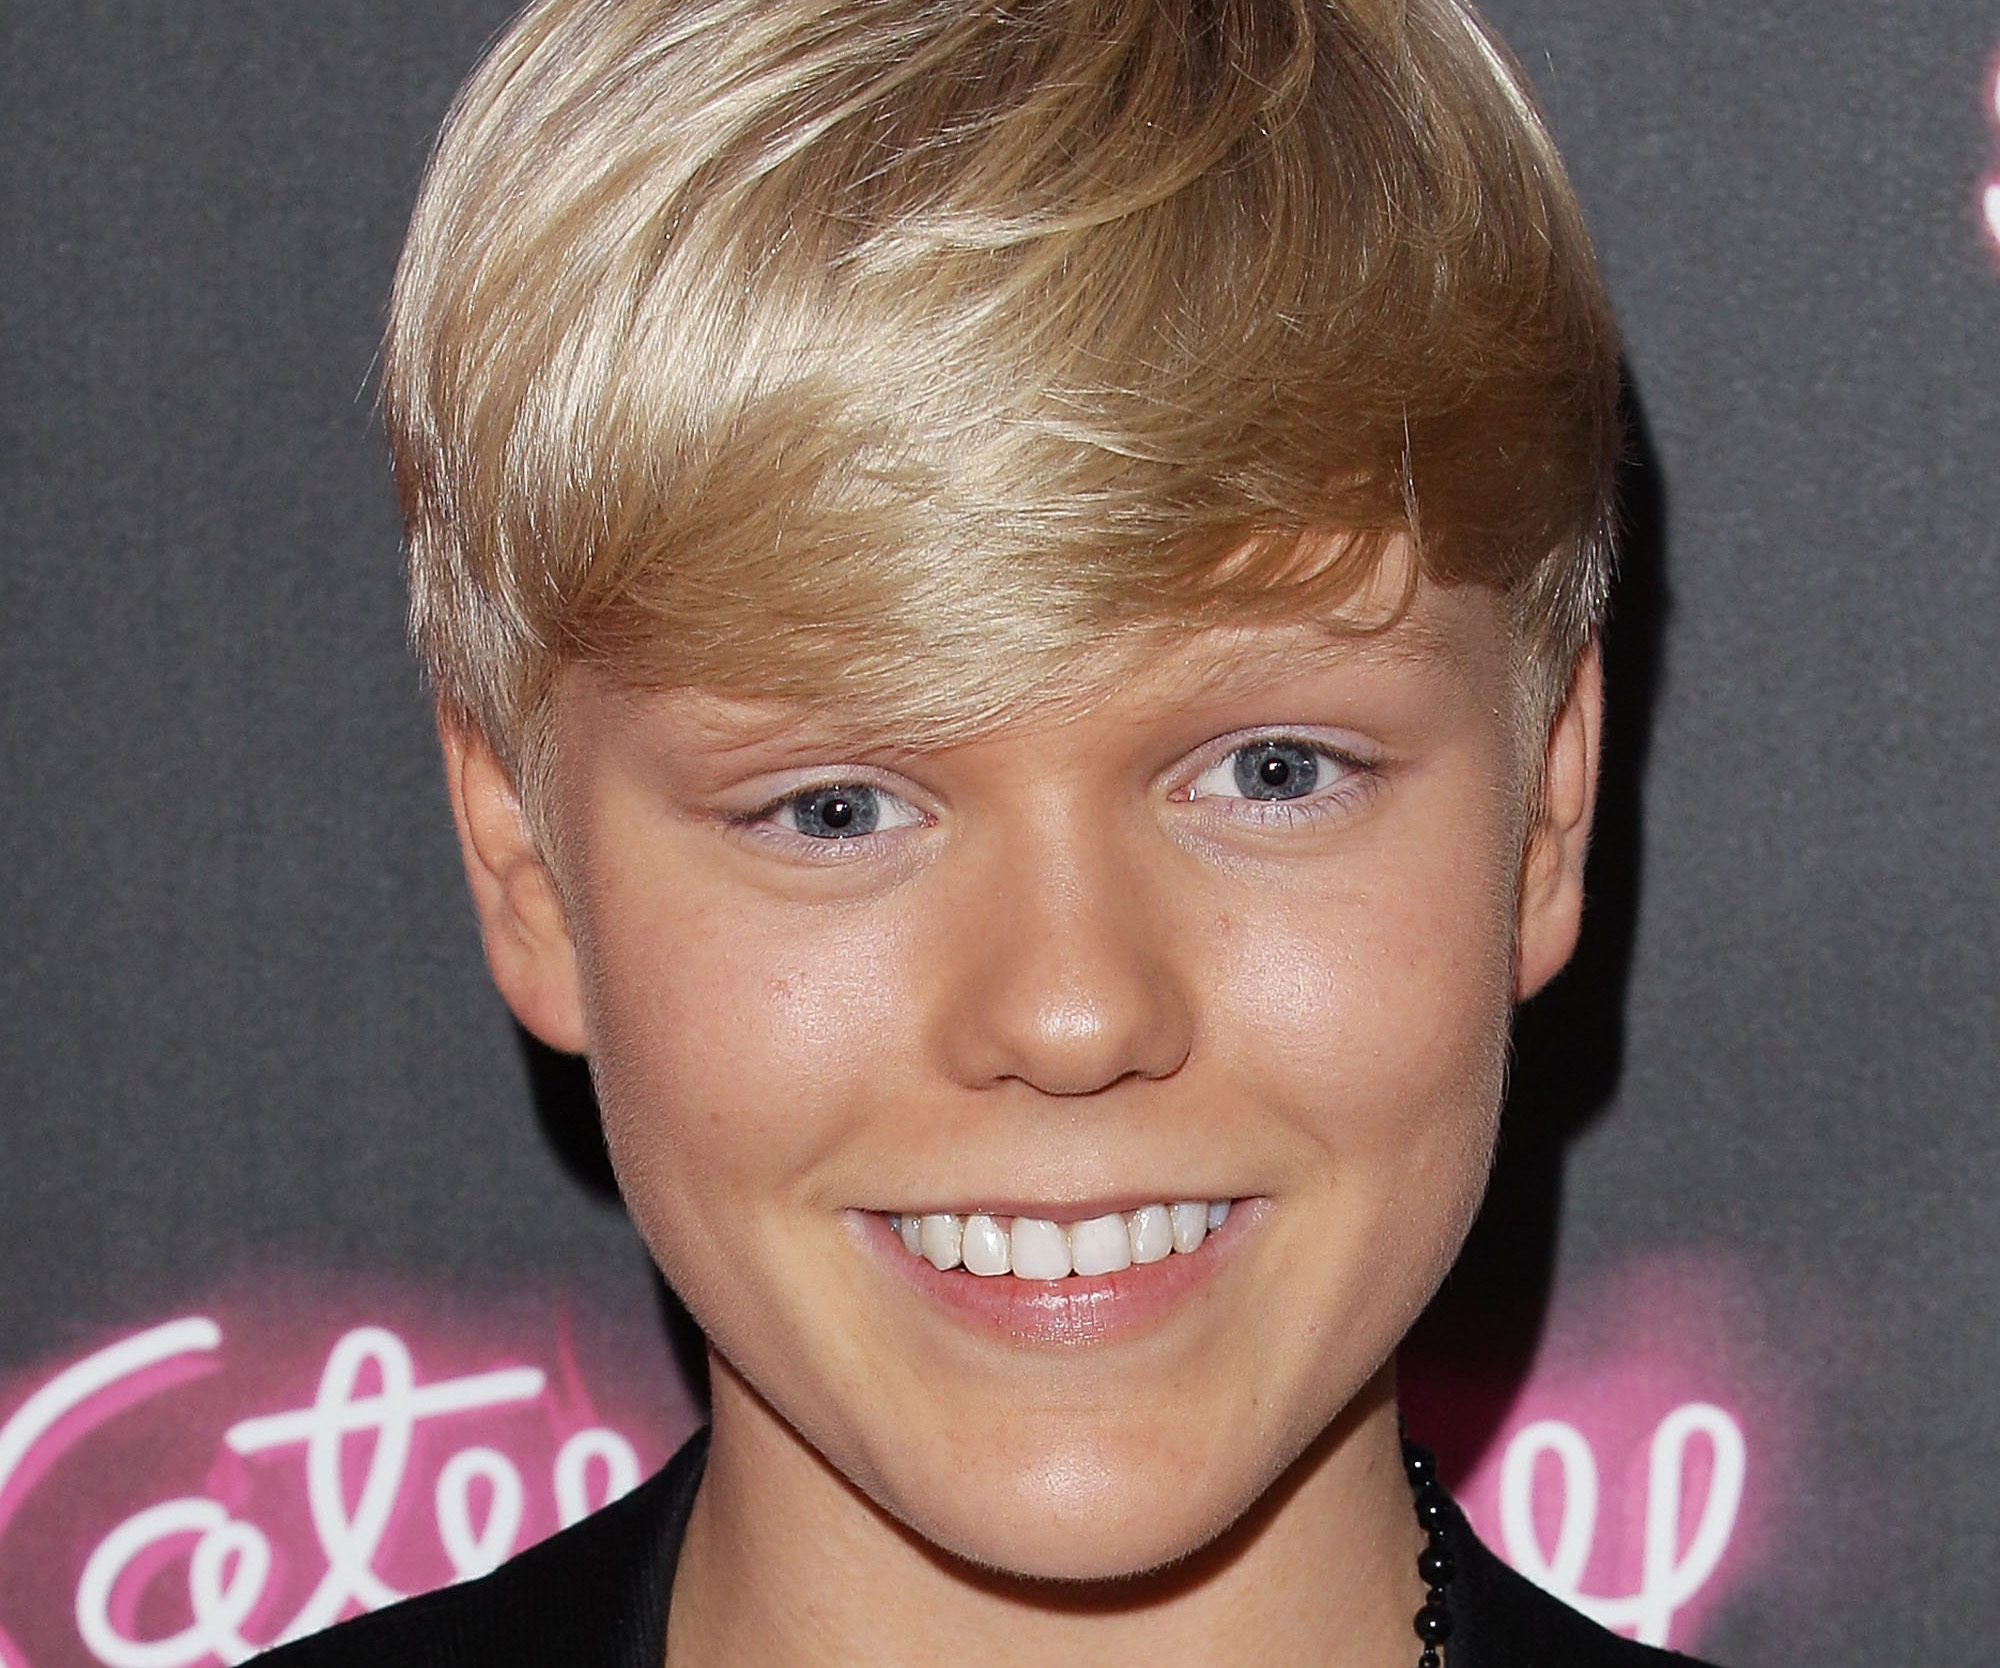 The Voice contestant Jack Vidgen’s astonishing before and after transformation will honestly have you SHOOK